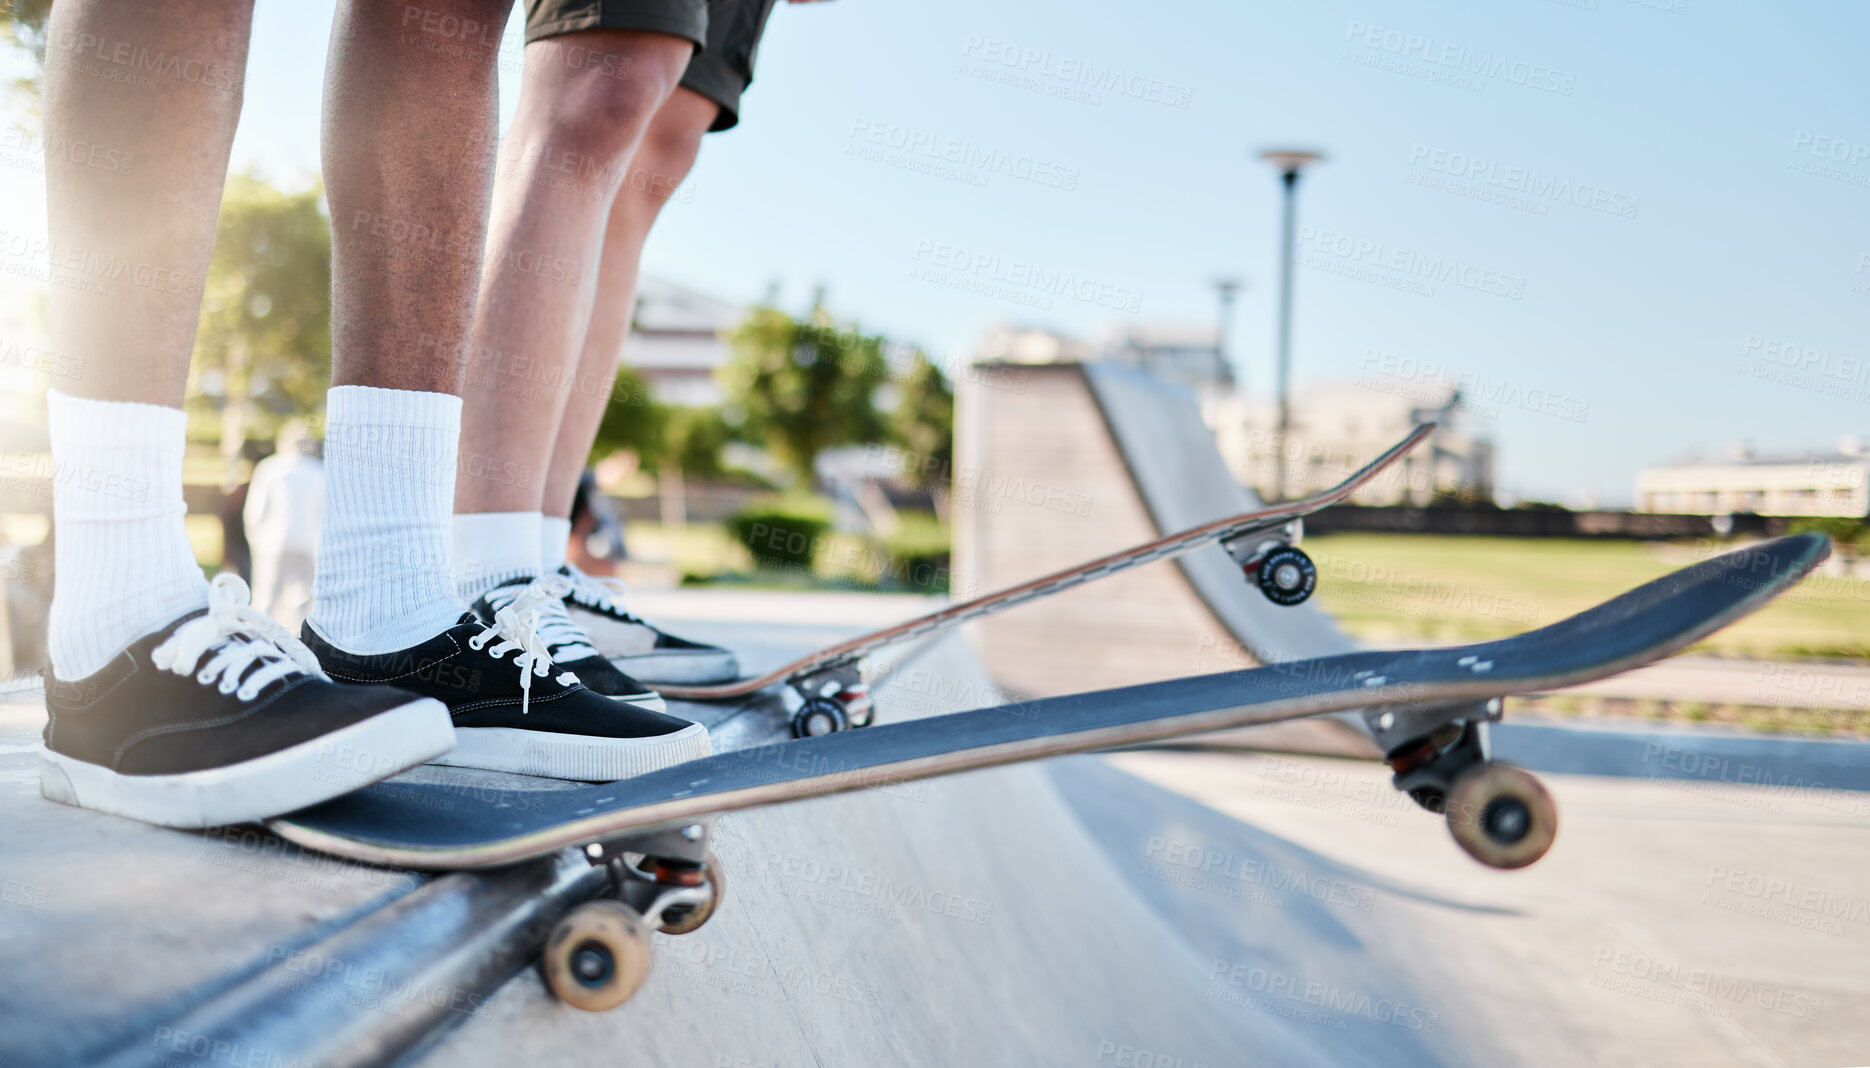 Buy stock photo Skateboarding, skateboards and skatepark drop in for extreme sports exercise friend for dangerous fun, adrenaline rush and learning trick. Modern outdoor activity, healthy athlete and fitness workout